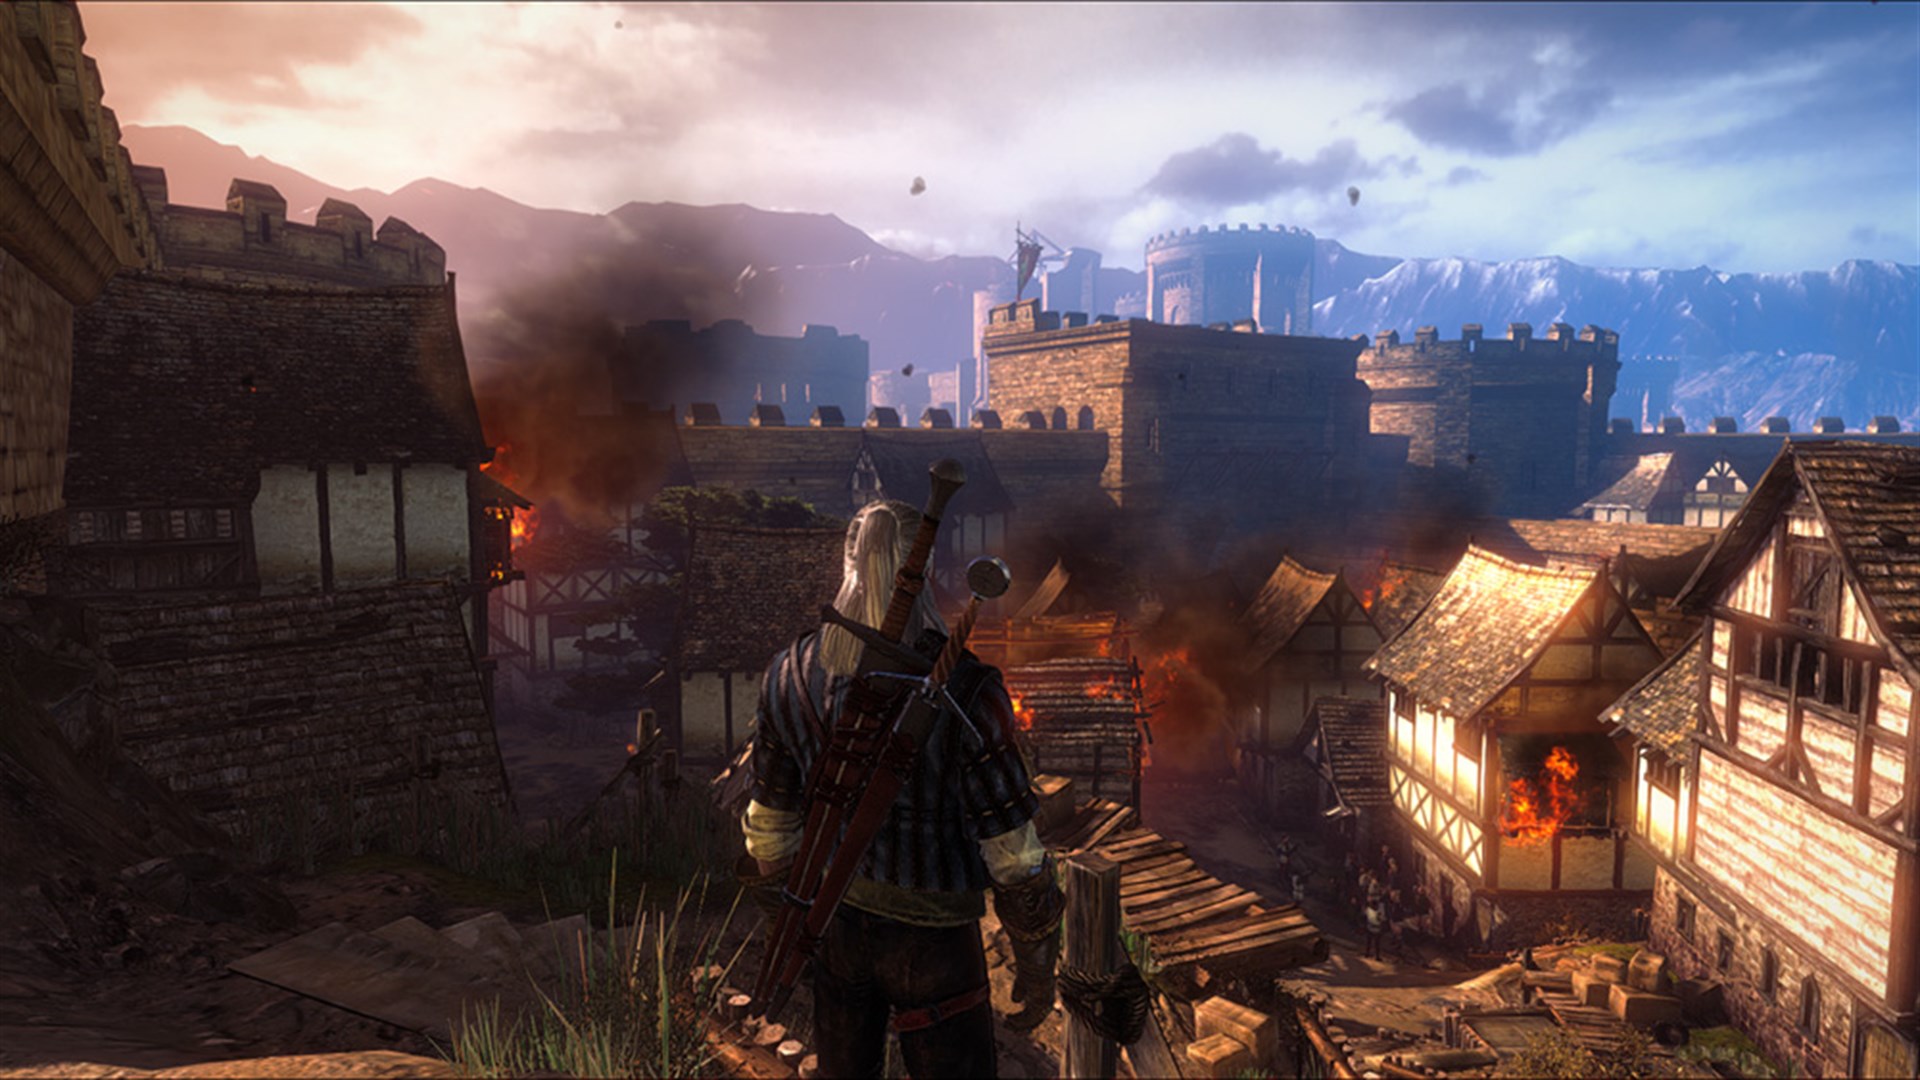 the witcher 2 xbox marketplace